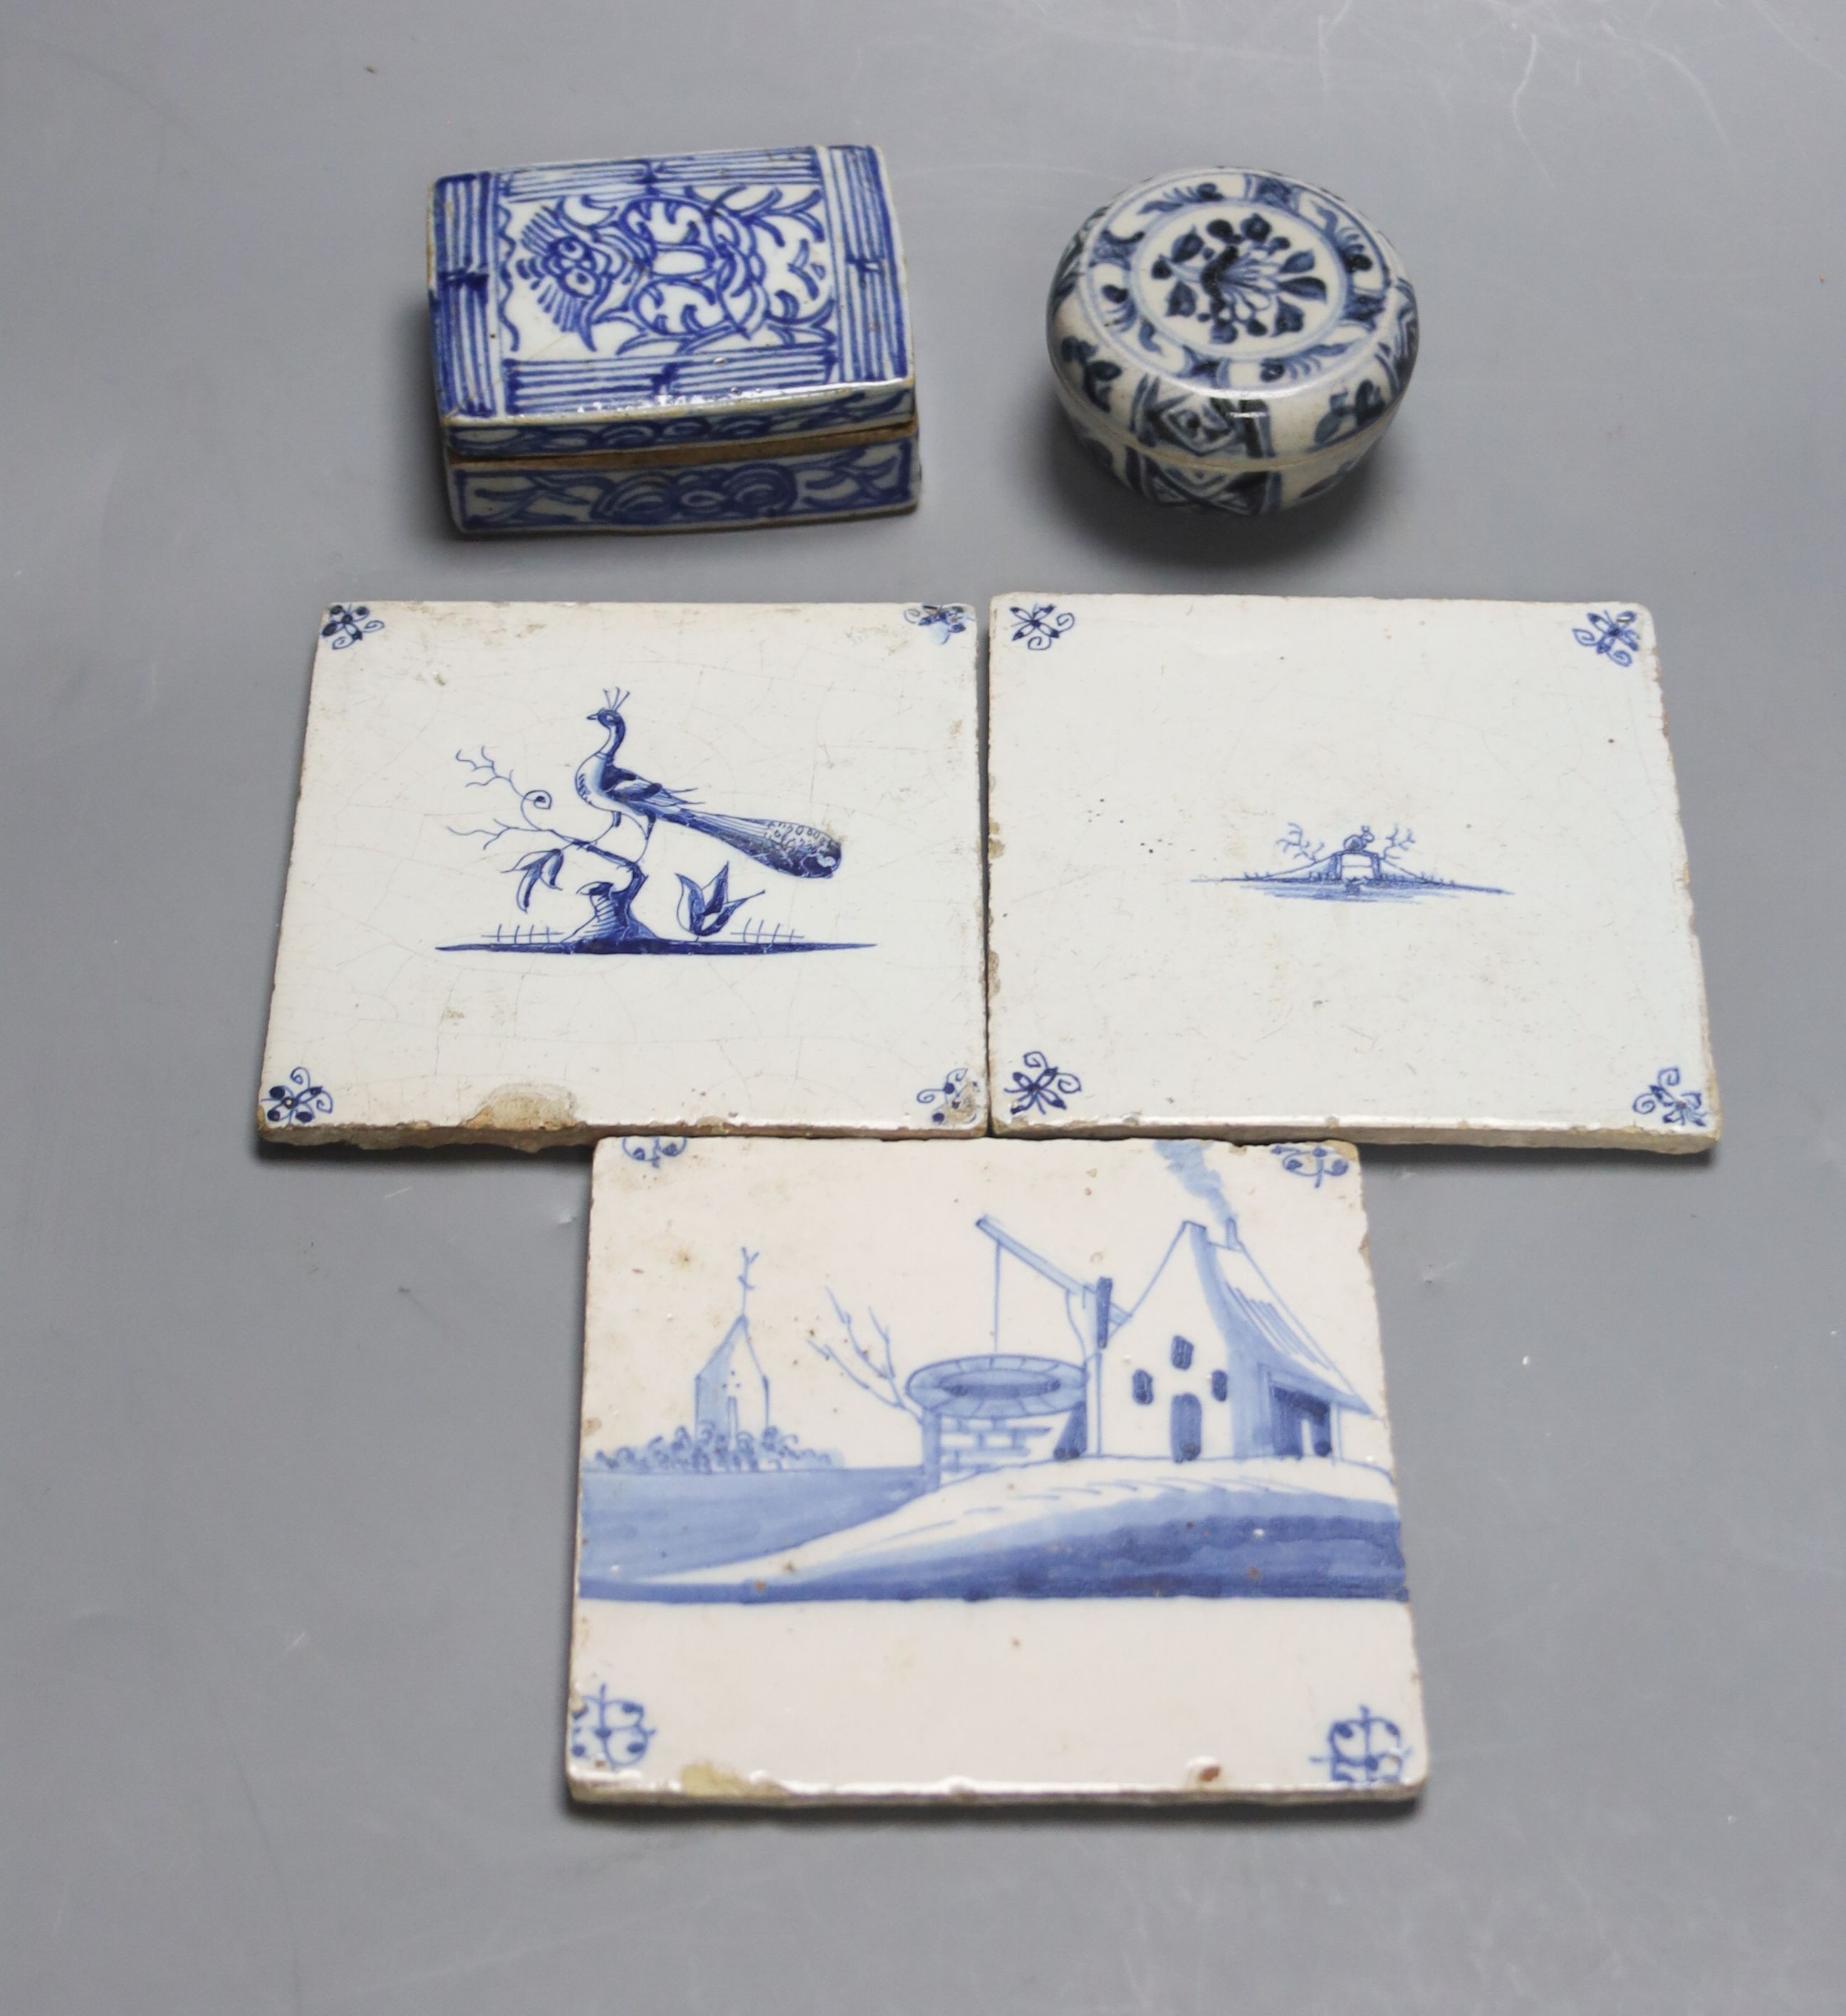 Two 18th century Dutch Delft blue and white tiles, two Chinese porcelain boxes and covers and sundry items